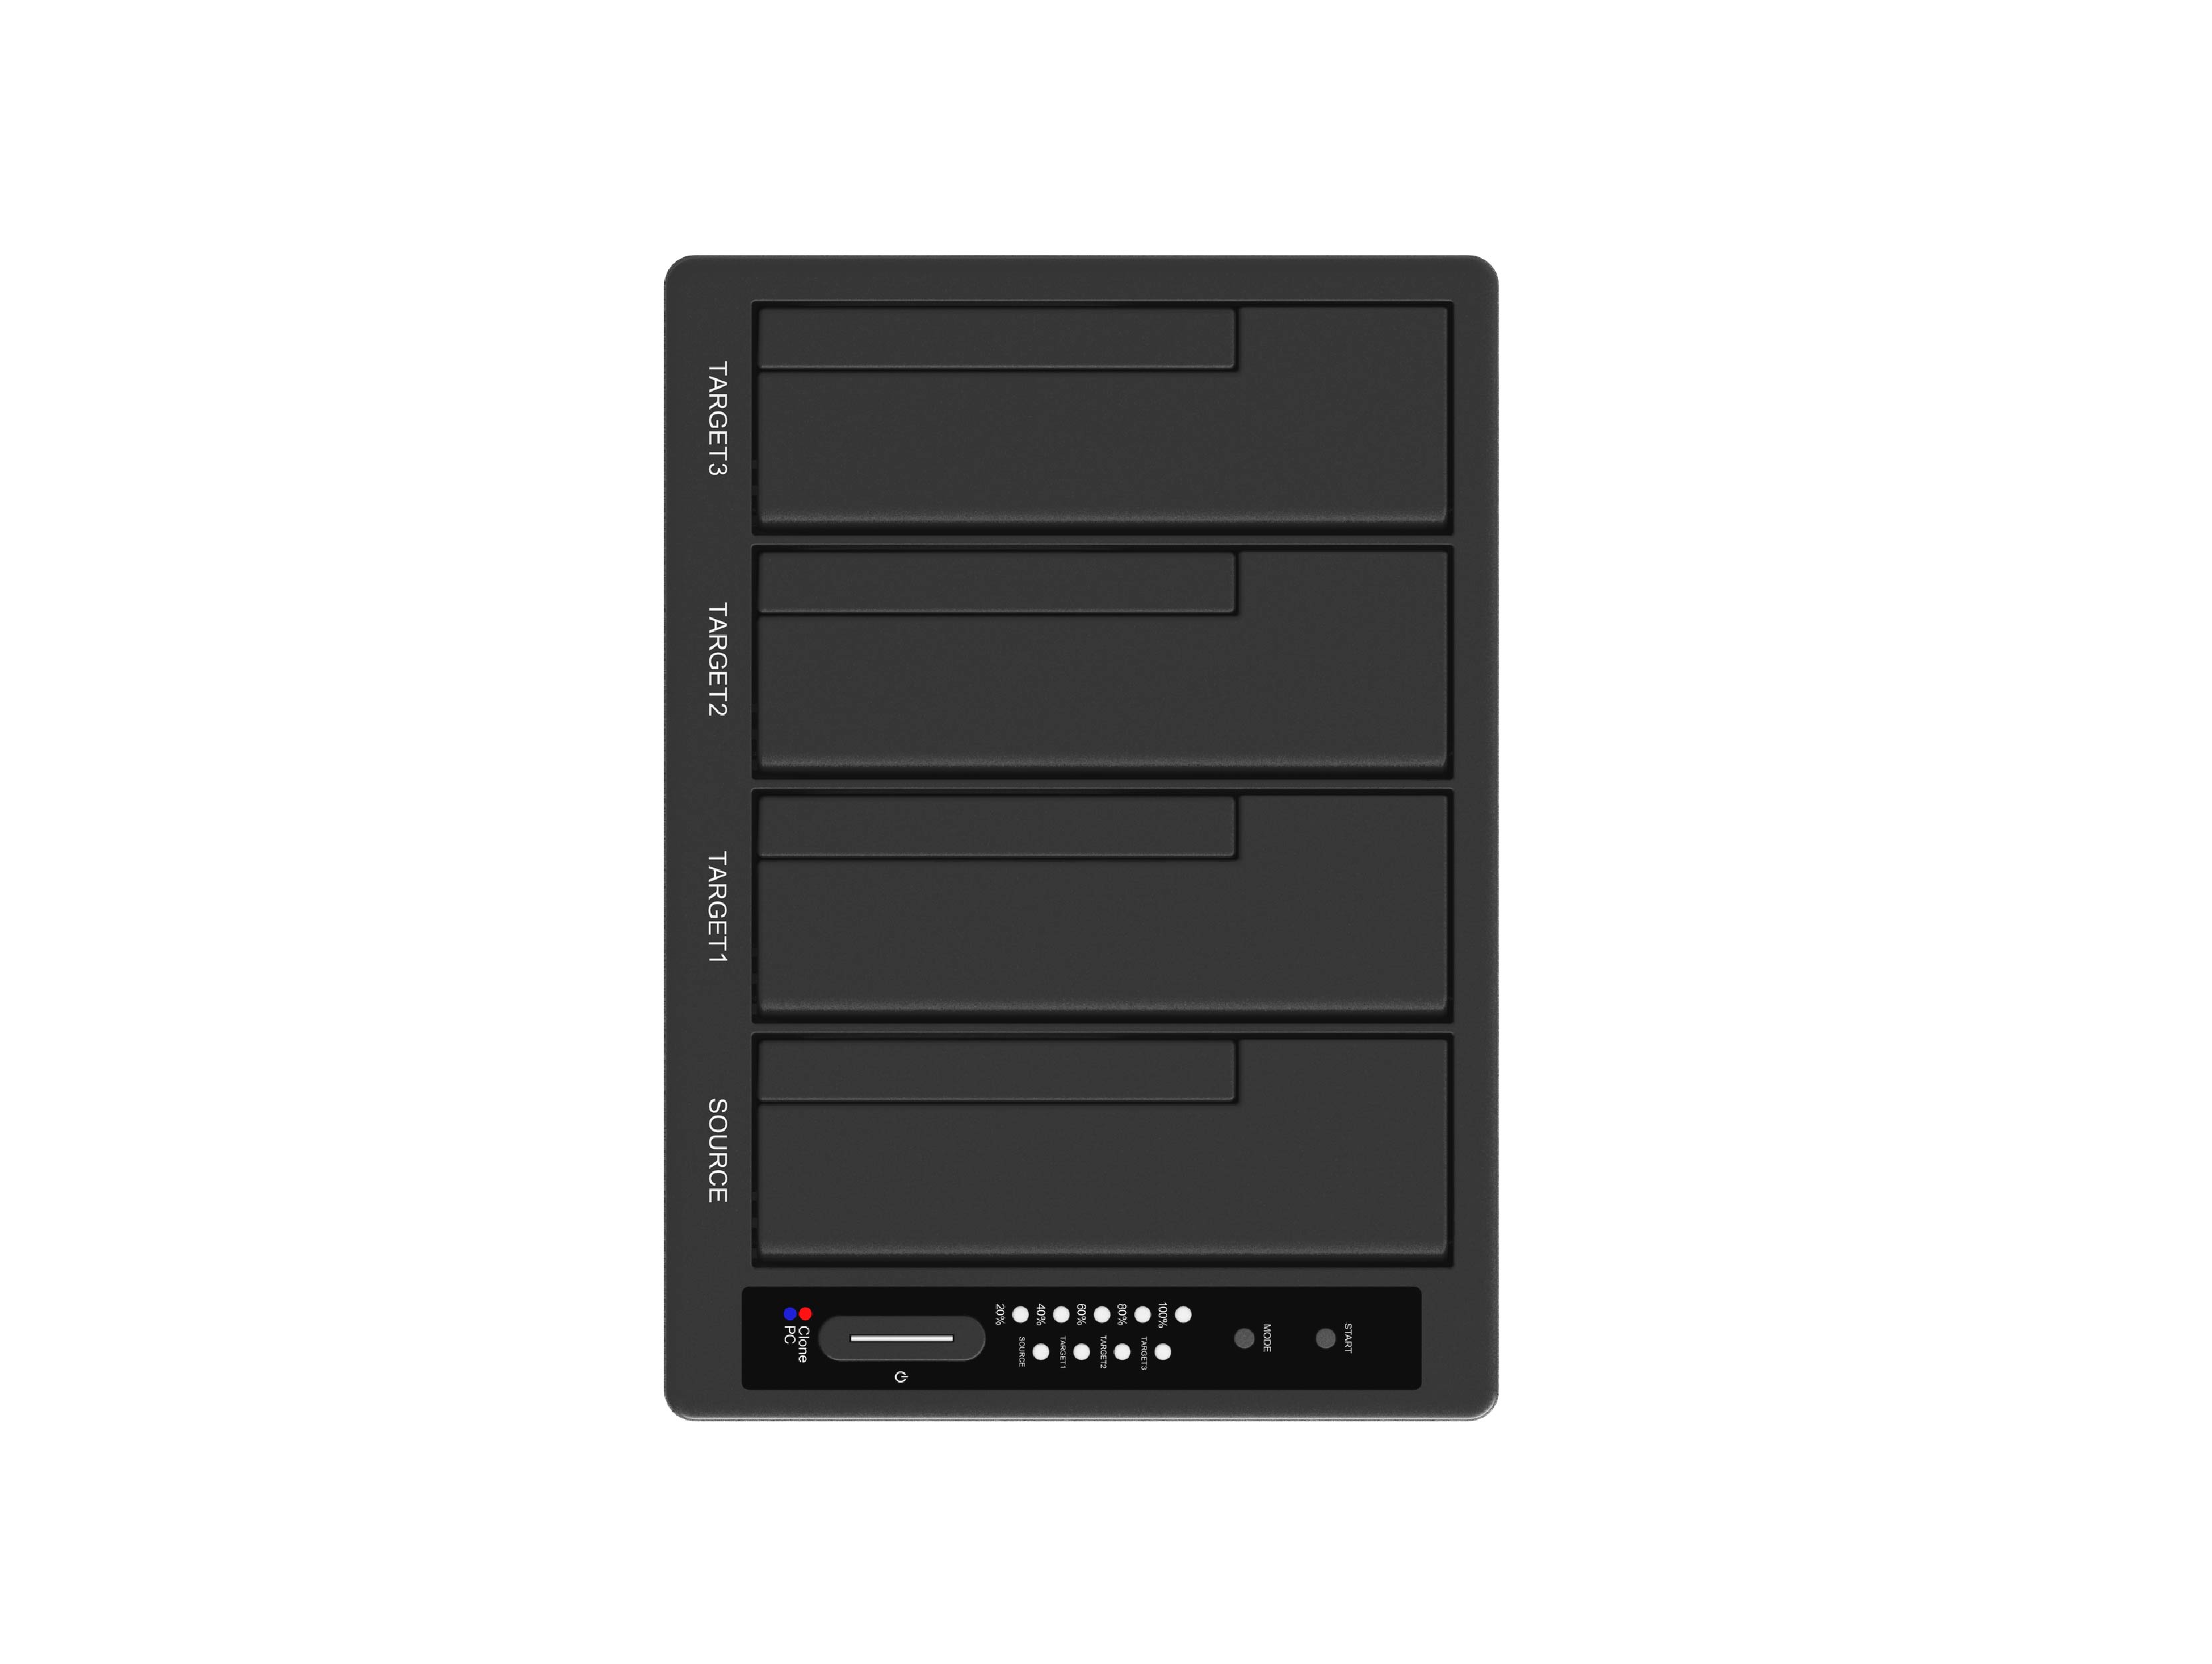 4 Bay SATA SSD/HDD Duplicator (SI-7945USJ3-D), applicable 4 3.5" or 2.5" SATA HDD/SSD, support PC mode & clone mode switchable, USB-C 5Gbps to host.